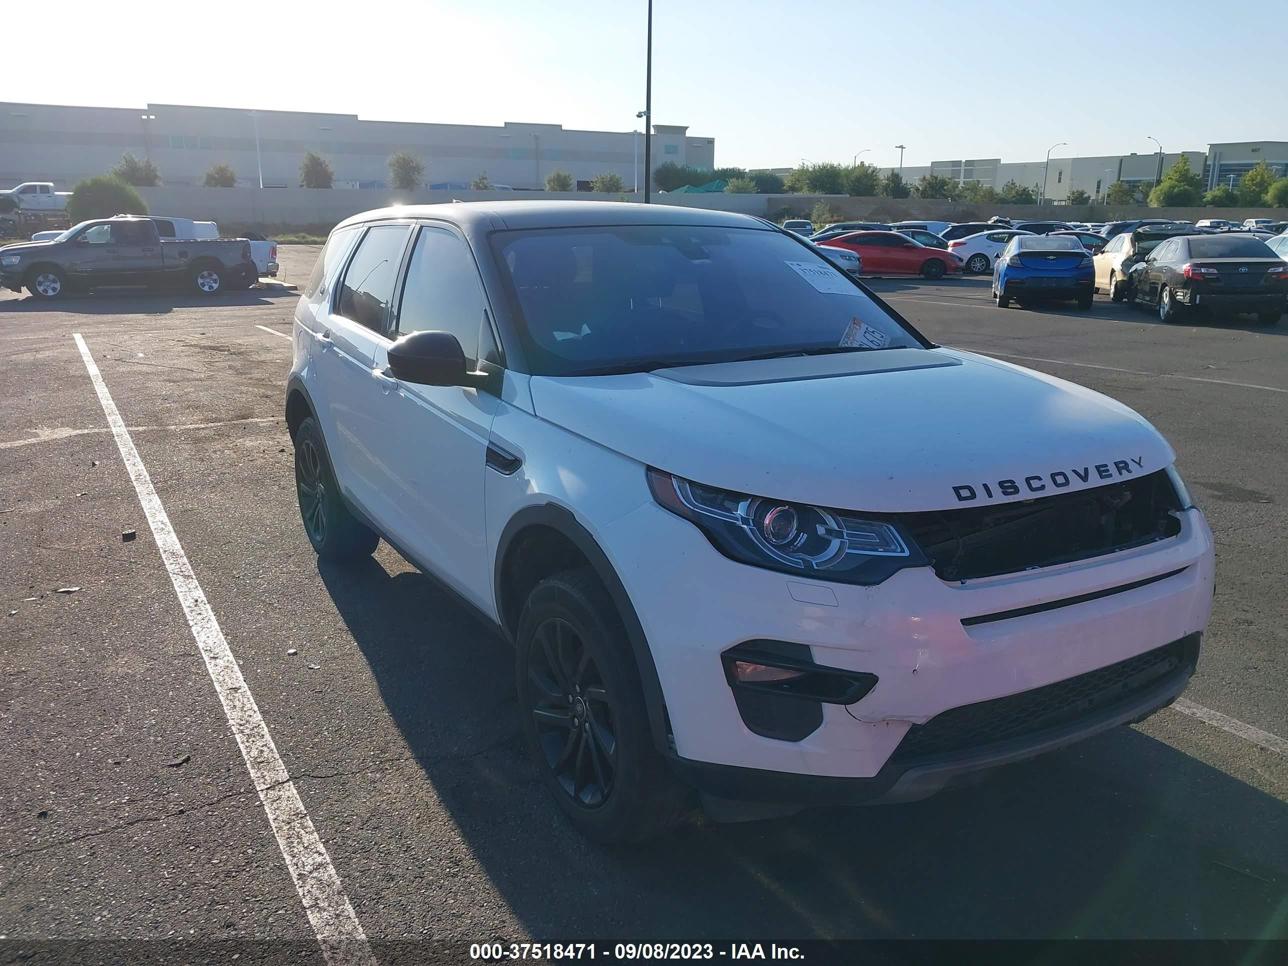 vin: SALCR2BG7HH689968 SALCR2BG7HH689968 2017 land rover discovery sport 2000 for Sale in 90248, 16920 S Figueroa St, Carson, USA